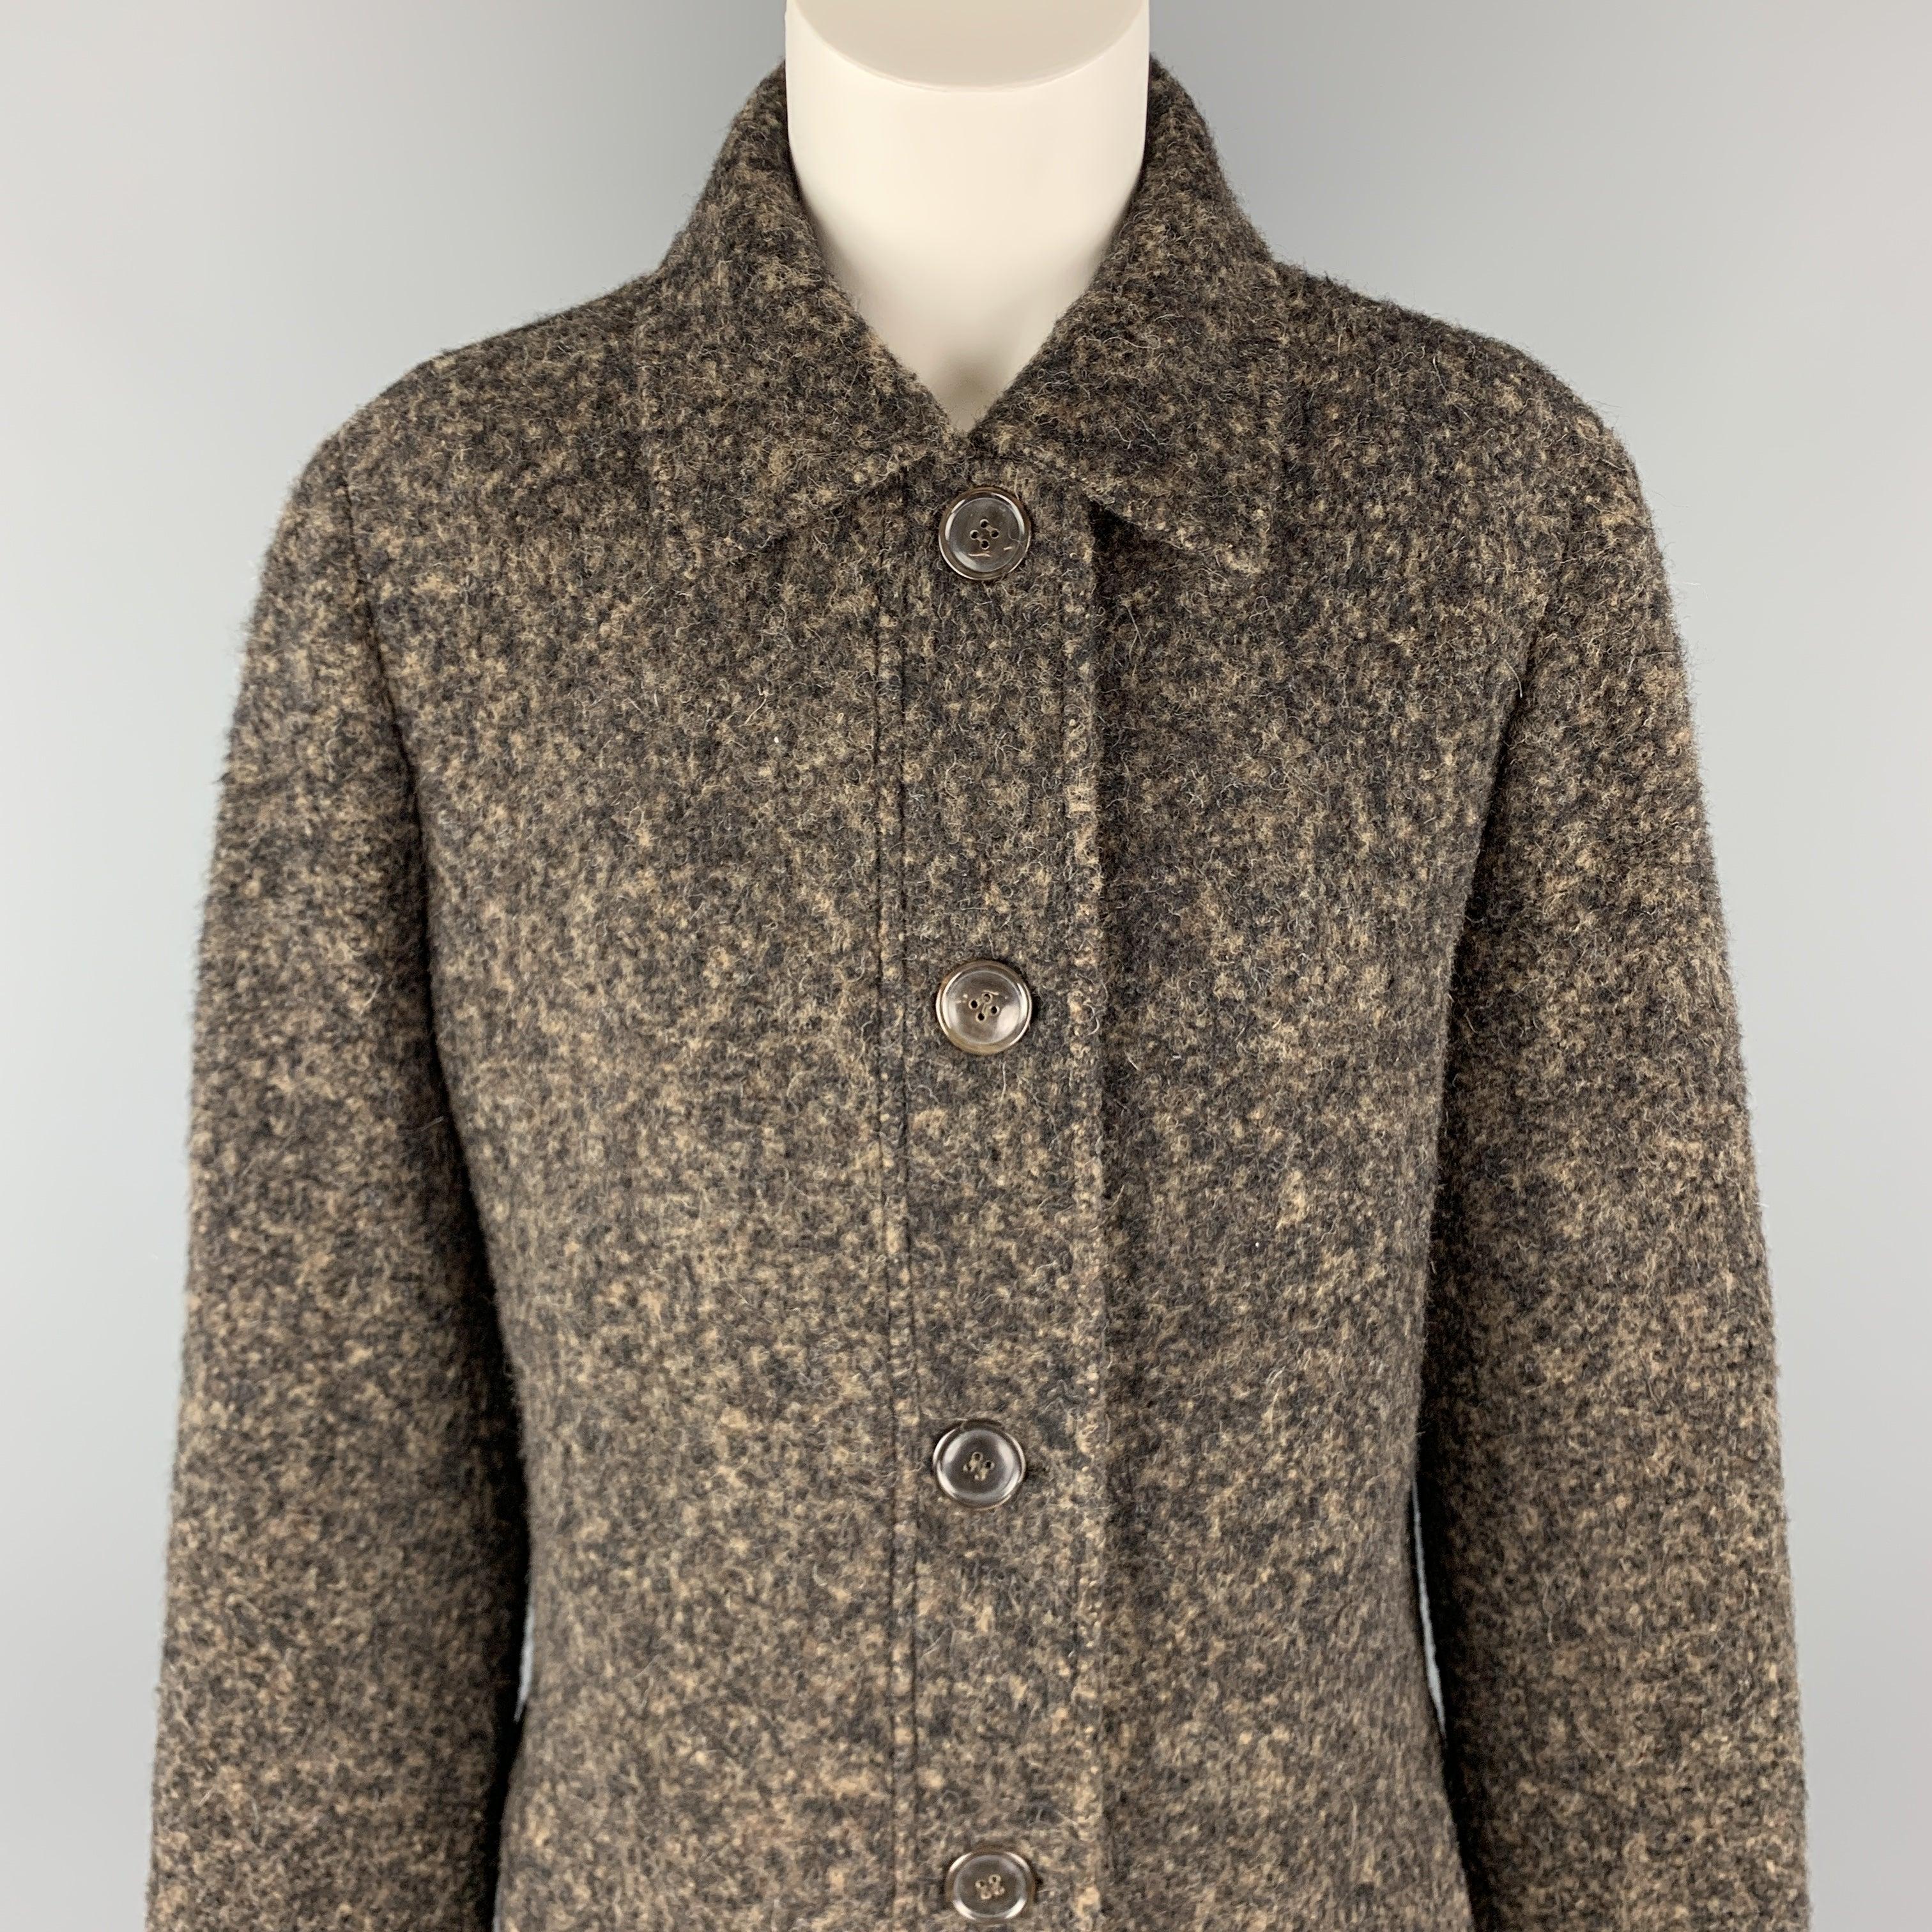 LUCIANO BARBERA coat comes in black and taupe marbled alpaca fabric with a pointed collar, flap pockets, and single breasted button front. Made in Italy.Excellent Pre-Owned Condition. 

Marked:   IT 44 

Measurements: 
 
Shoulder:
16 inches Bust:
42